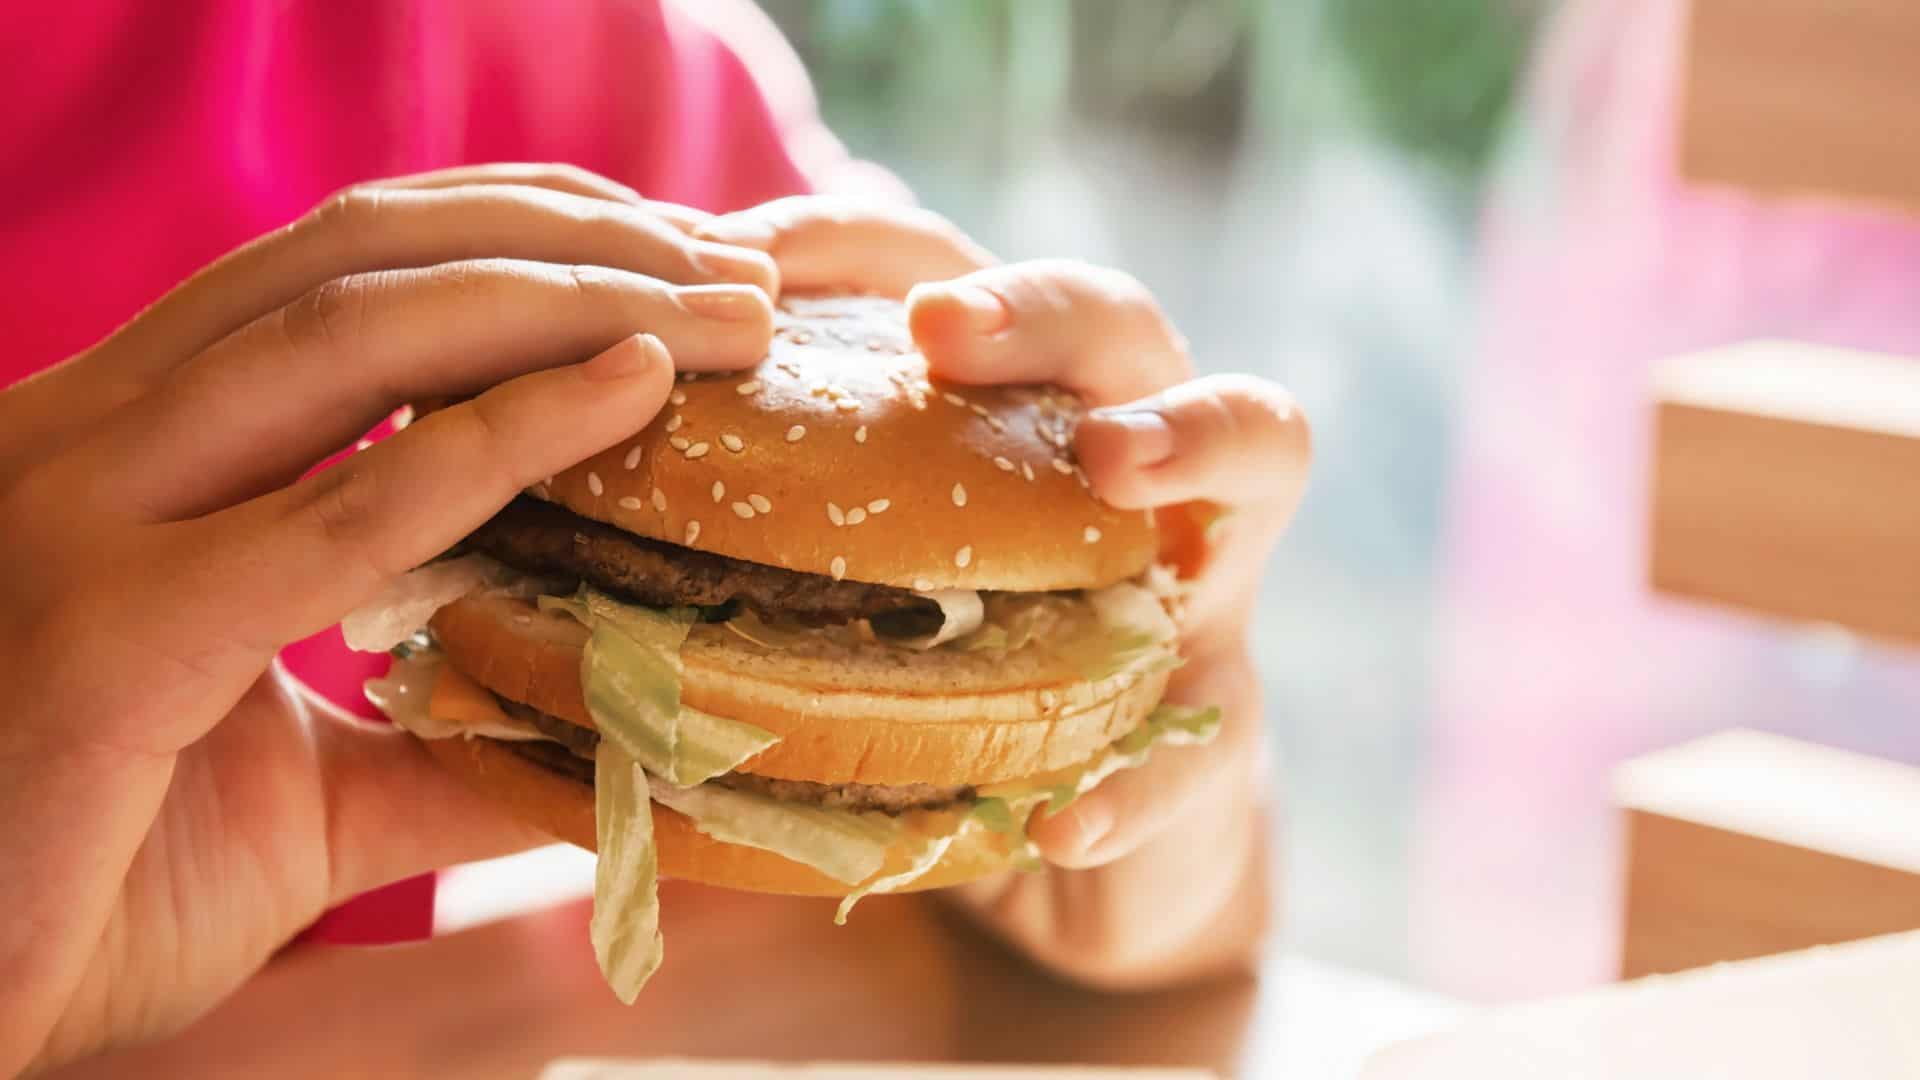 <p>We never know if the food we’re eating is as good as we think, and sometimes, it can be terrifying to find out the truth.</p><p>So it’s a big relief to know McDonald sources its meat from real cattle and ensures they were raised on a certified, responsible farm. So, every whopper you try is 100% pure beef.</p><p>That explains the richness and ever-lasting flavor of McDs. Combined with the delicious seasonings, of course.</p>